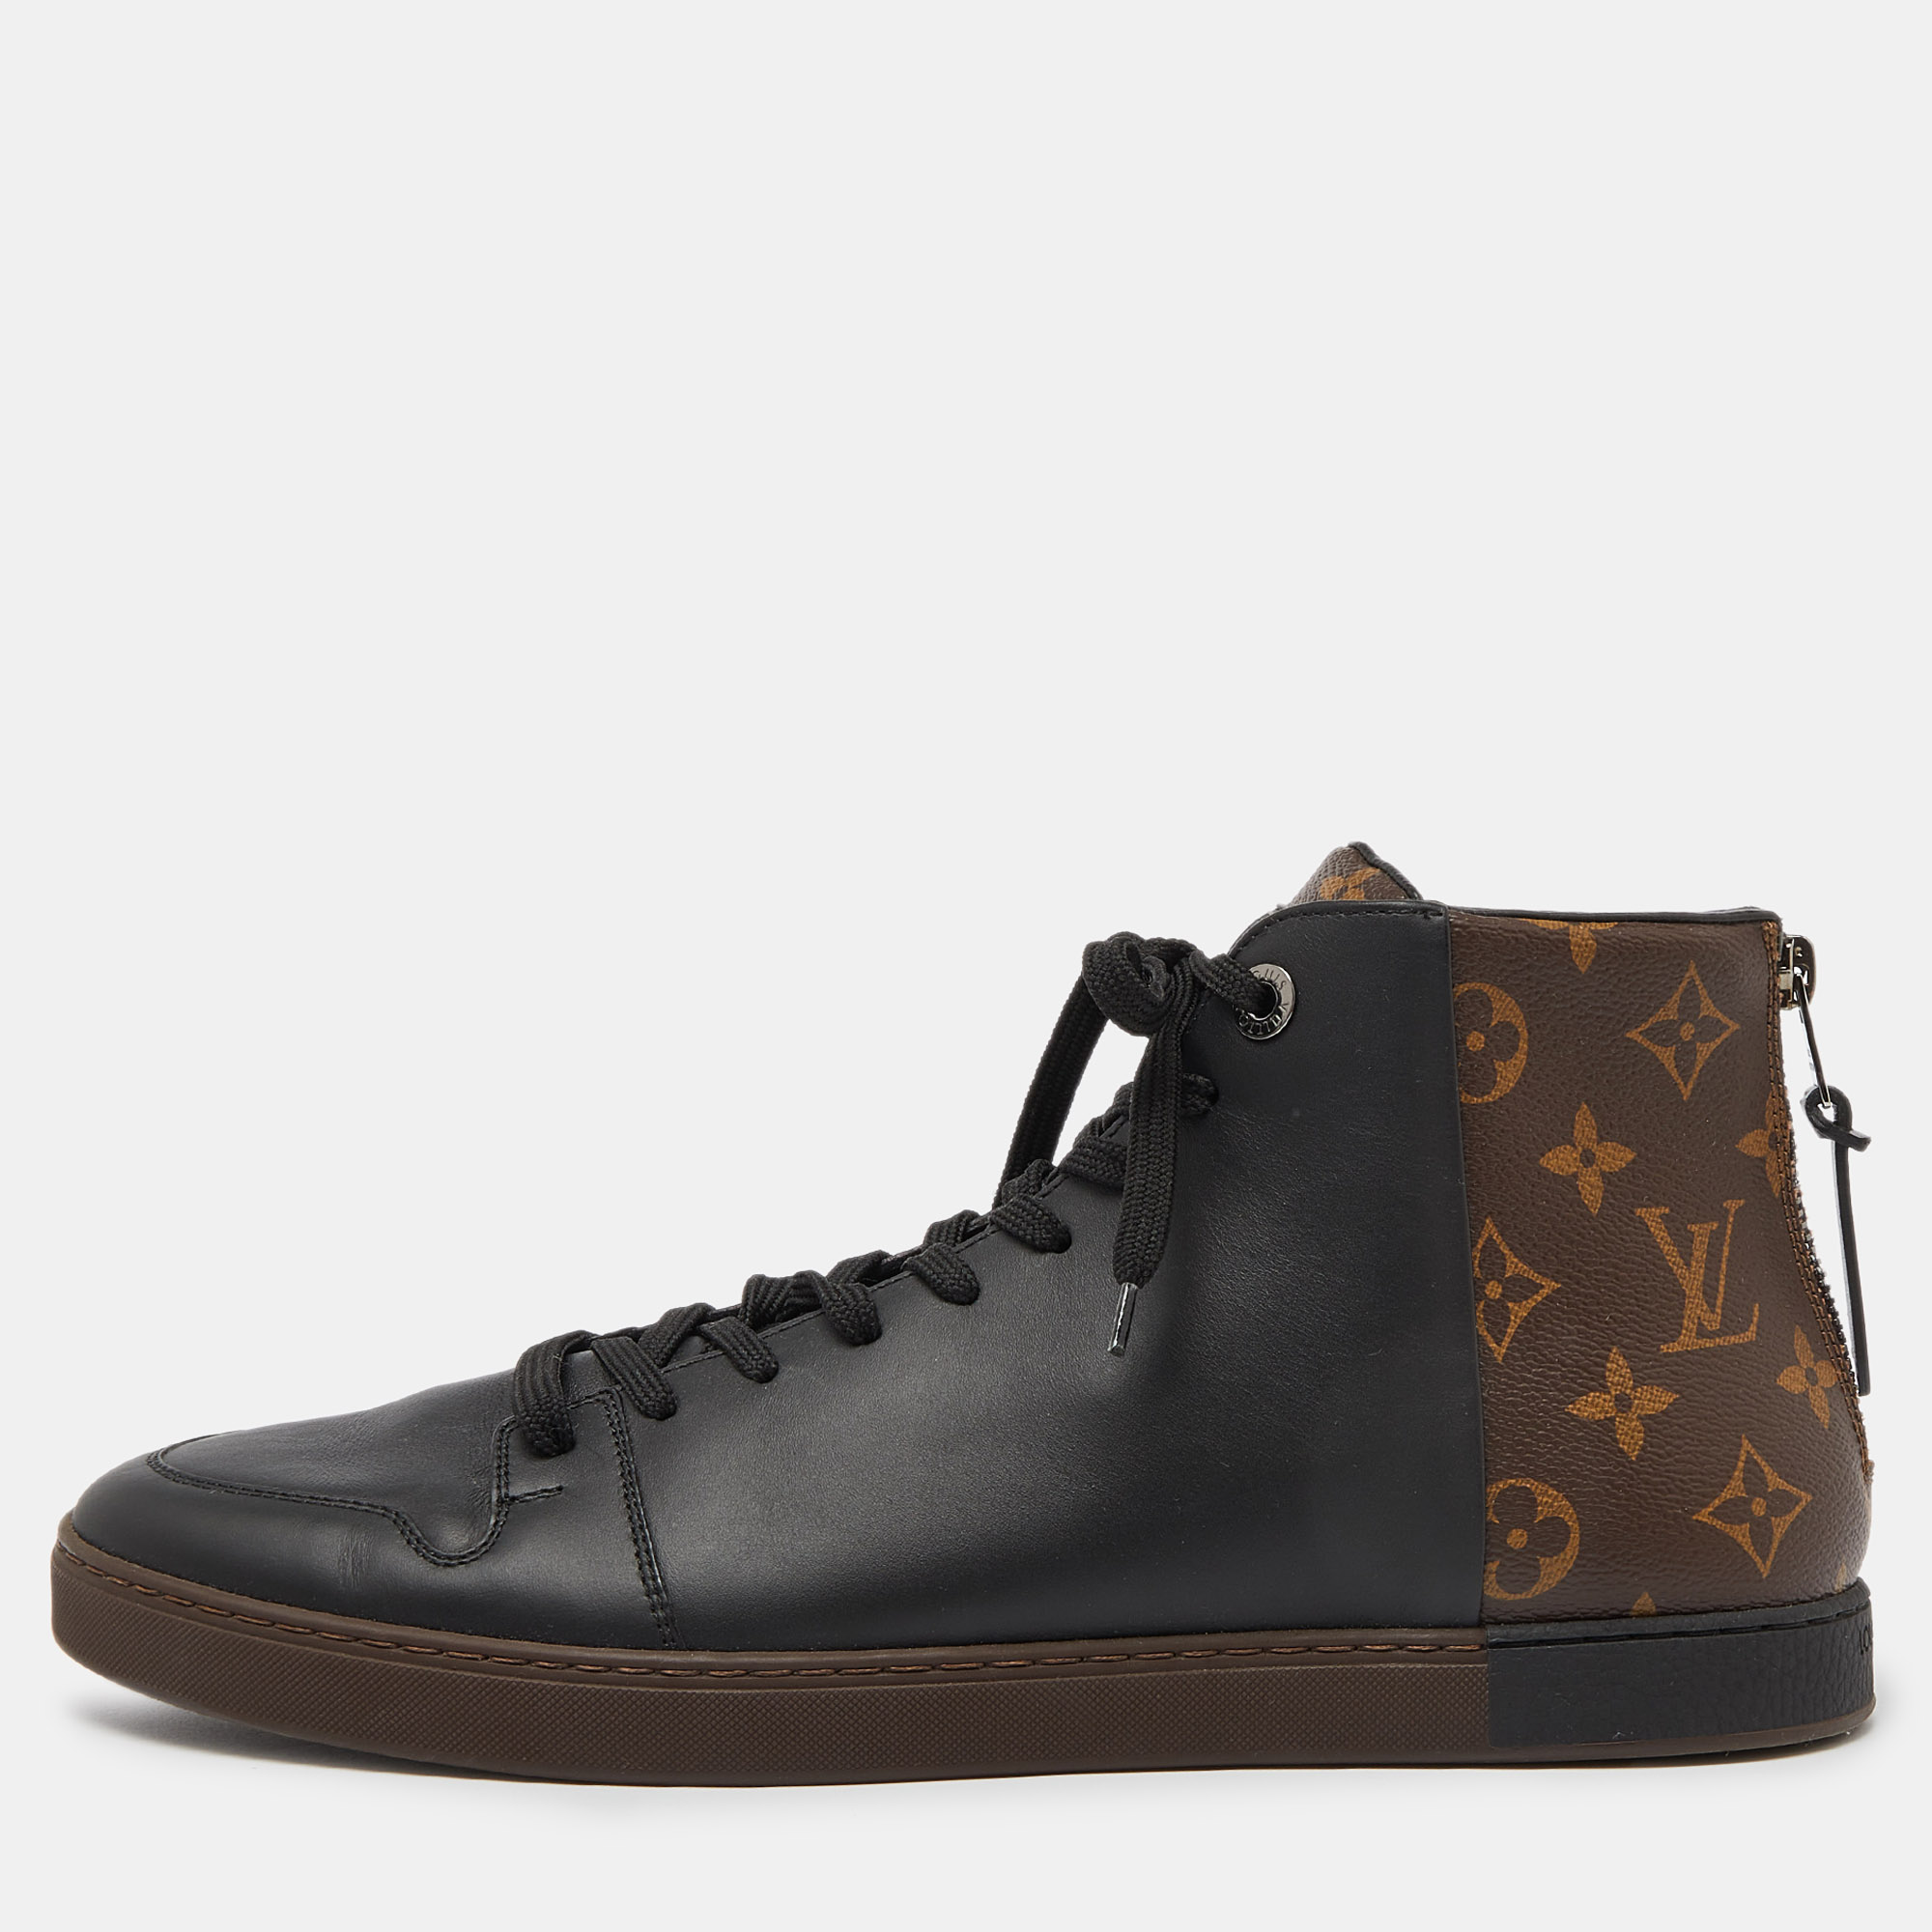 Louis vuitton black leather and monogram canvas line up sneakers size 42.5